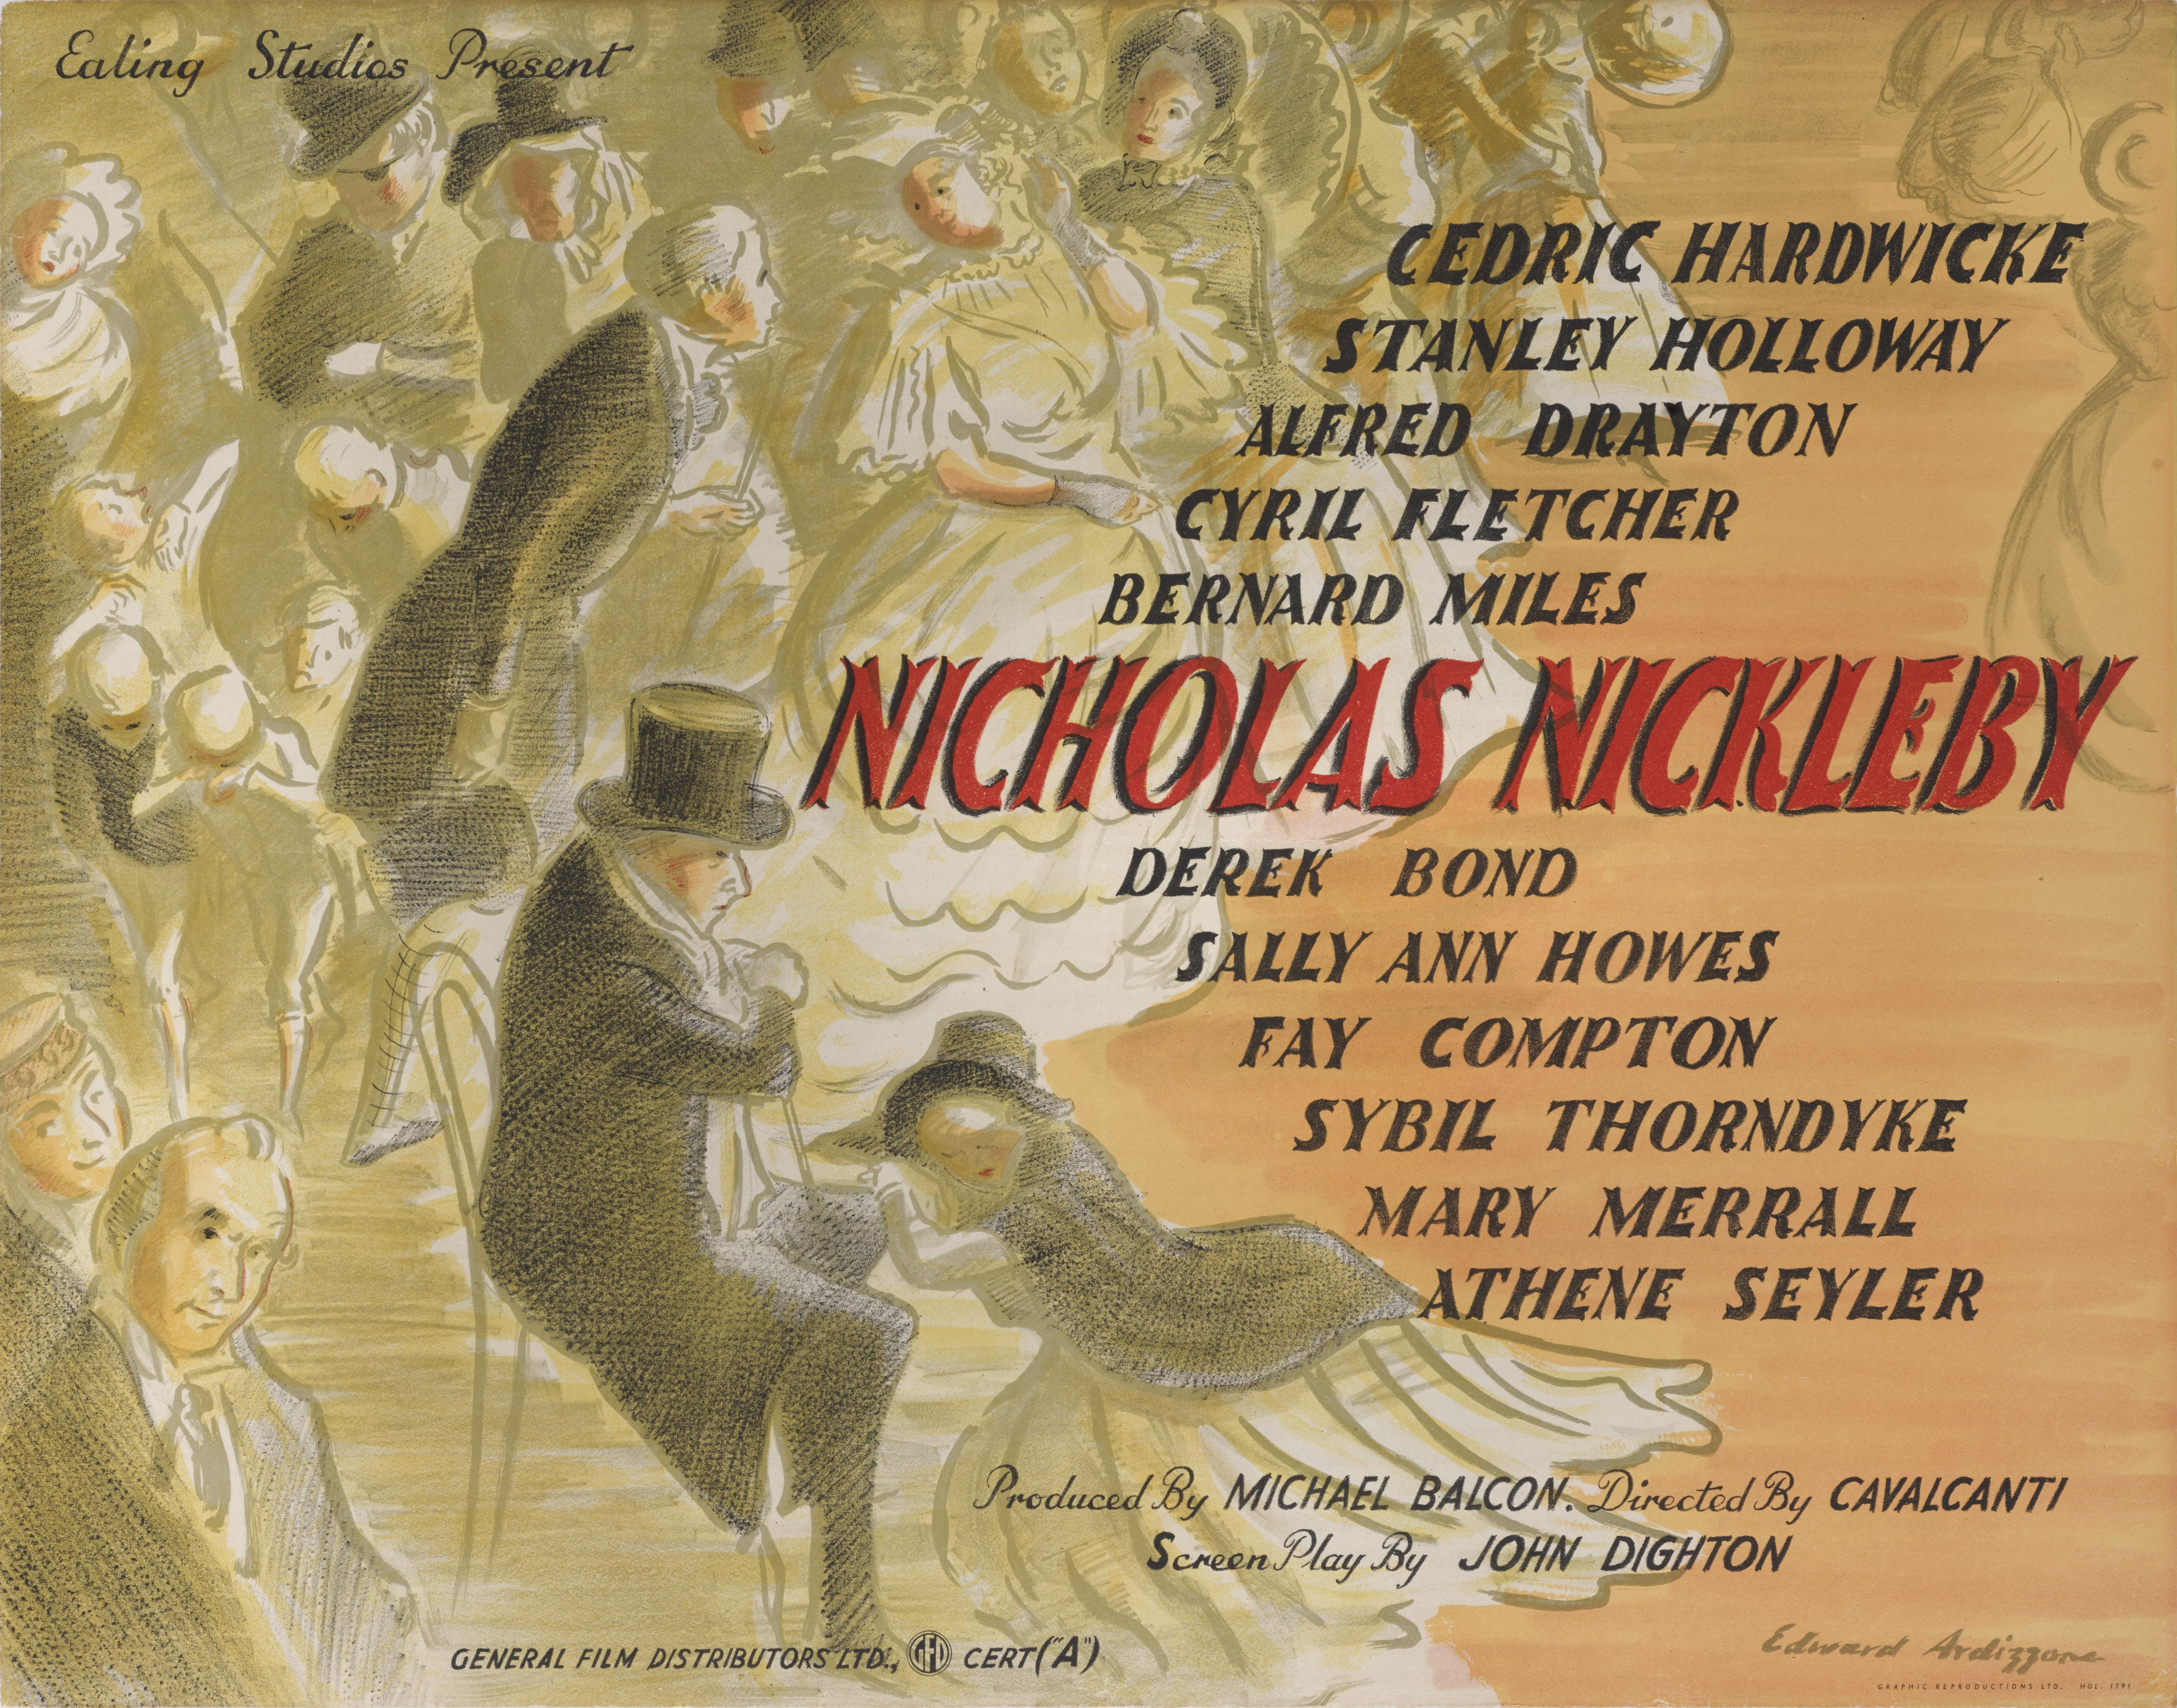 the life and adventures of nicholas nickleby